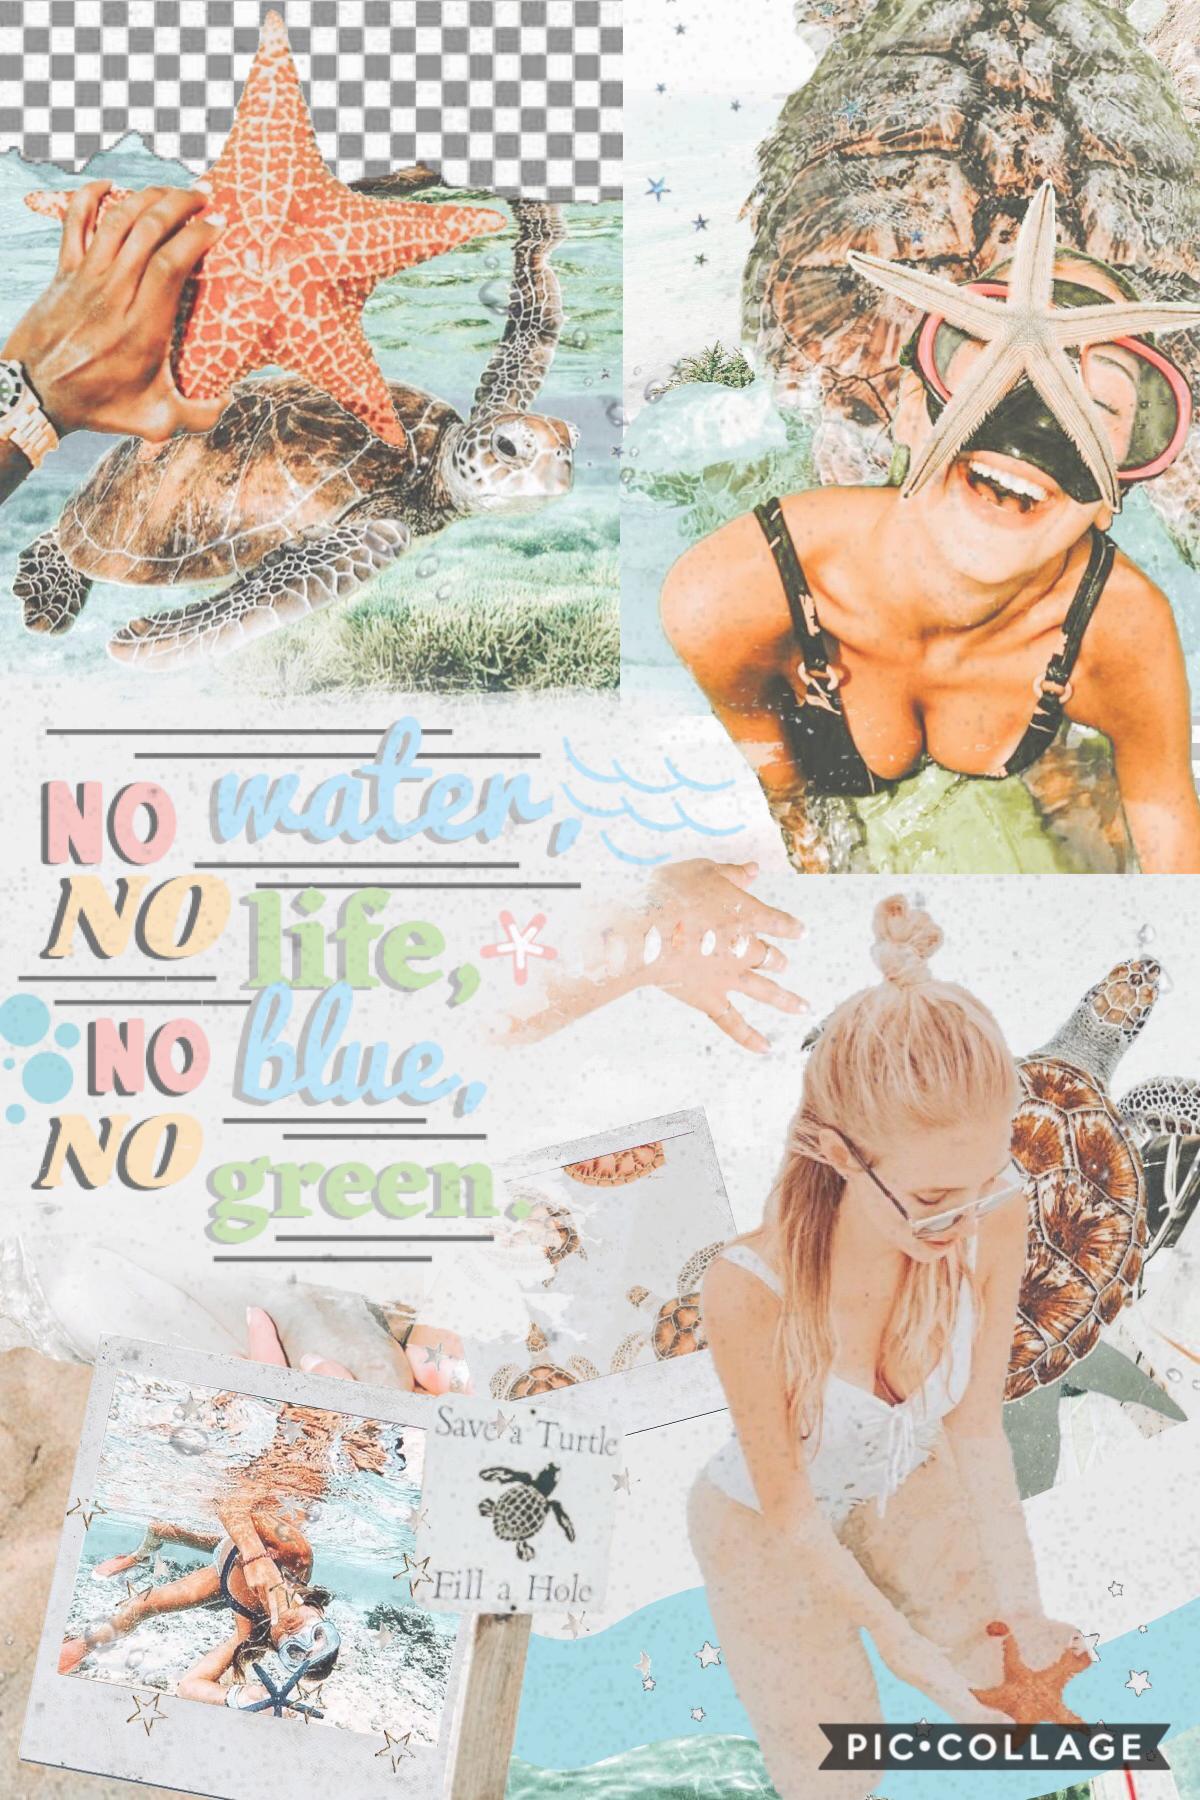 how’s everyone doing? i love the earthy theme of this collage!! 🌿🌊🐢 now i’m thinking of writing a summer bucket list!! ☀️🌻🌼 also, have i mentioned before how i much i love cruising!! 🛳🚢⚓️ i’ve been on royal caribbean’s allure of the seas!! third biggest i